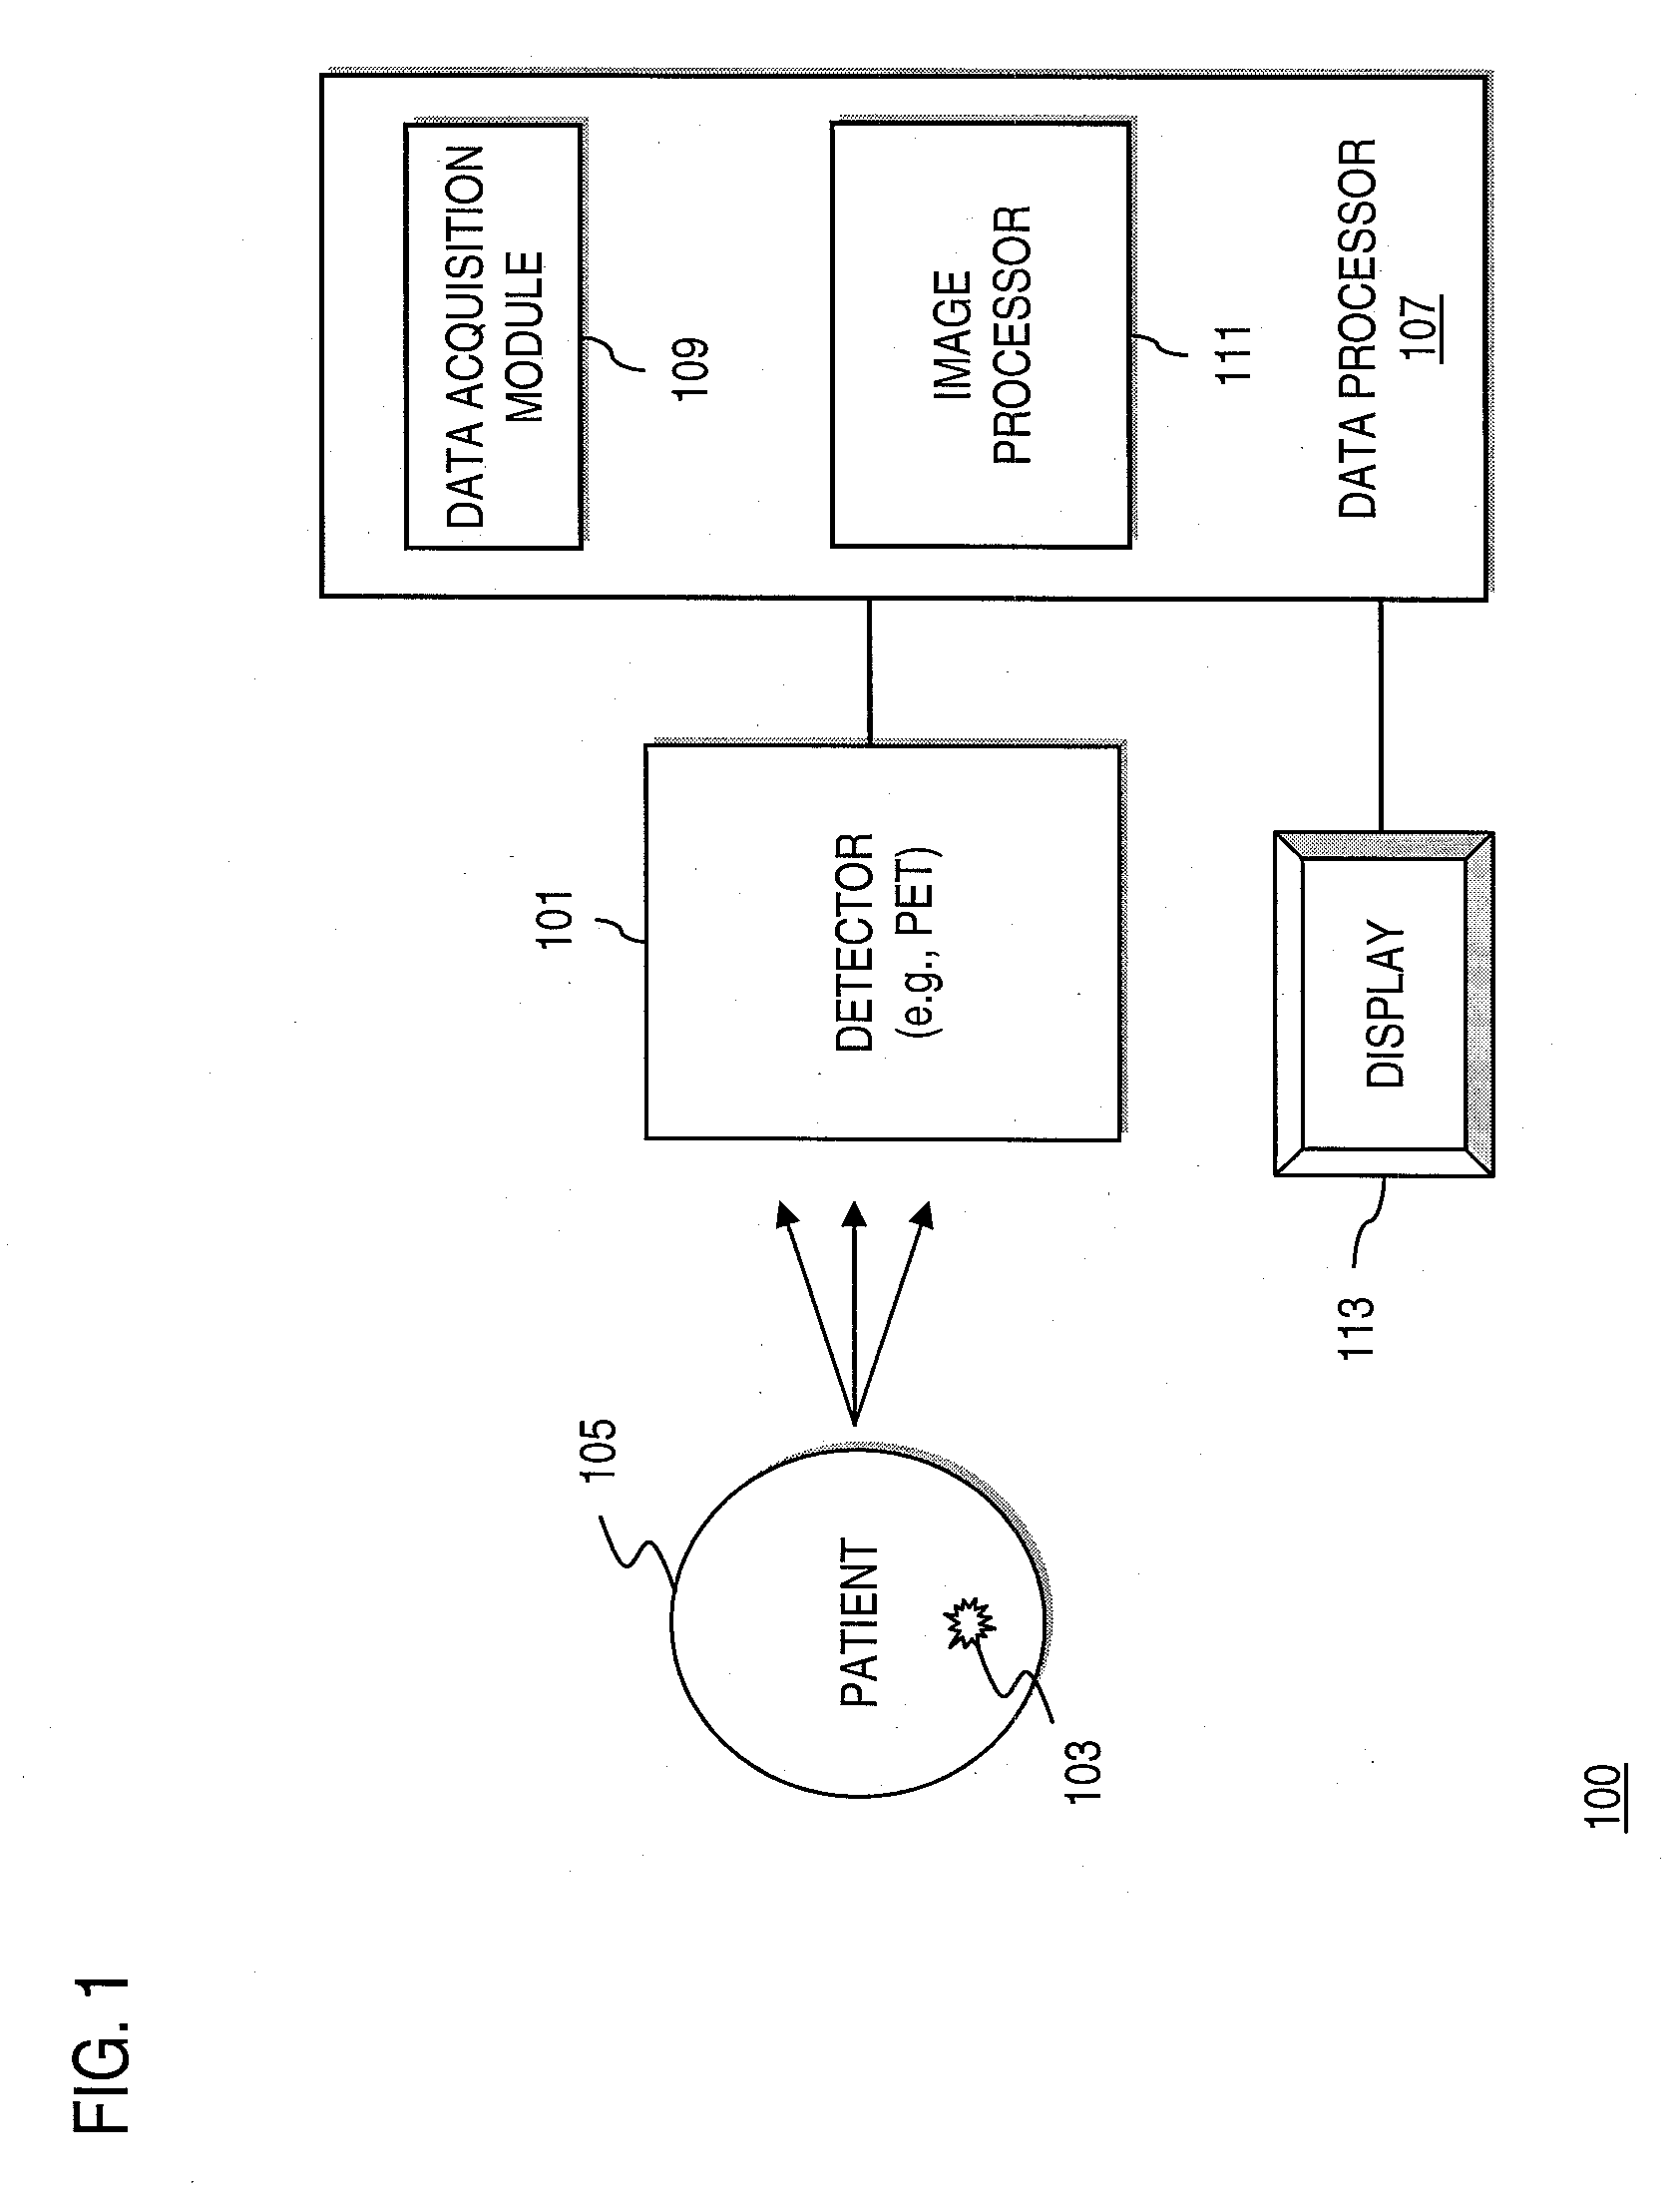 Method and Apparatus for Providing Depth-of-Interaction Detection Using Positron Emission Tomography (PET)